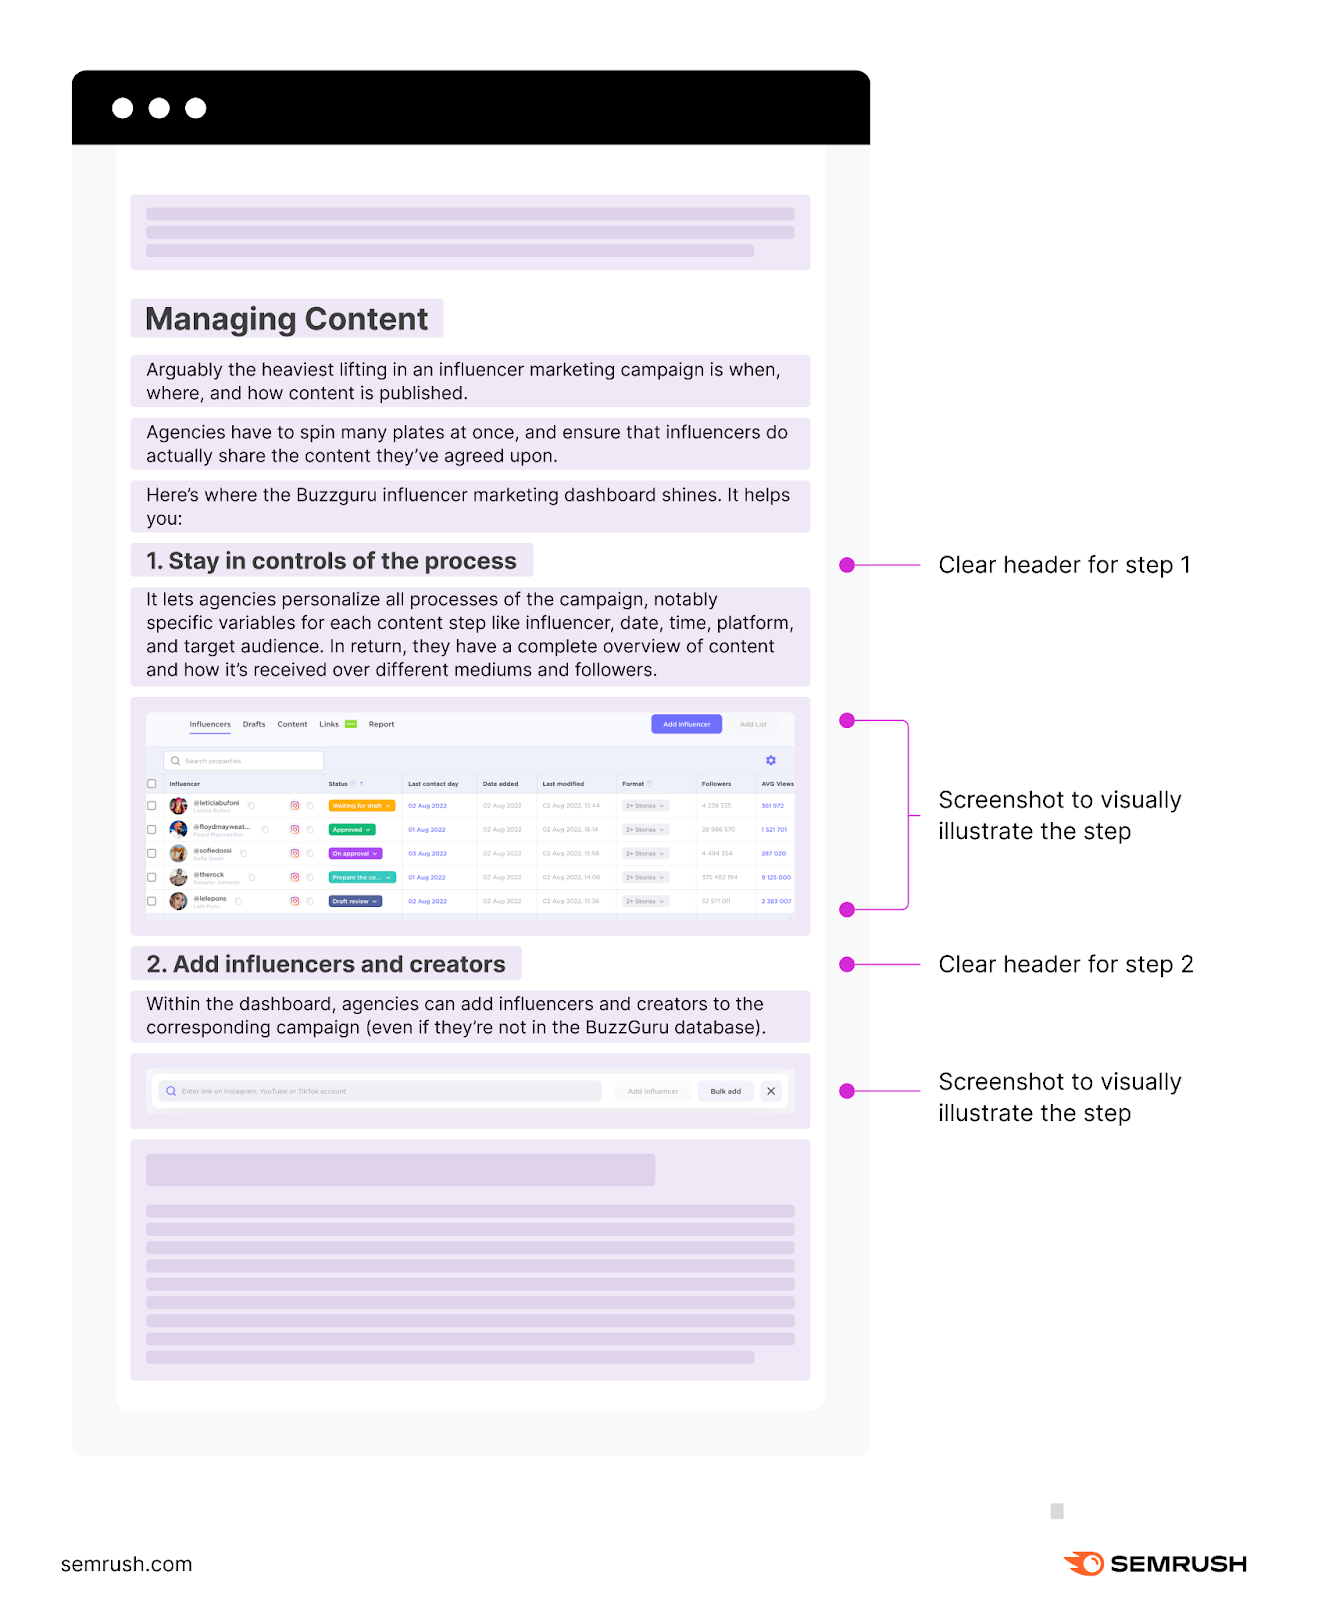 A section of the article providing step-by-step guidance on content management